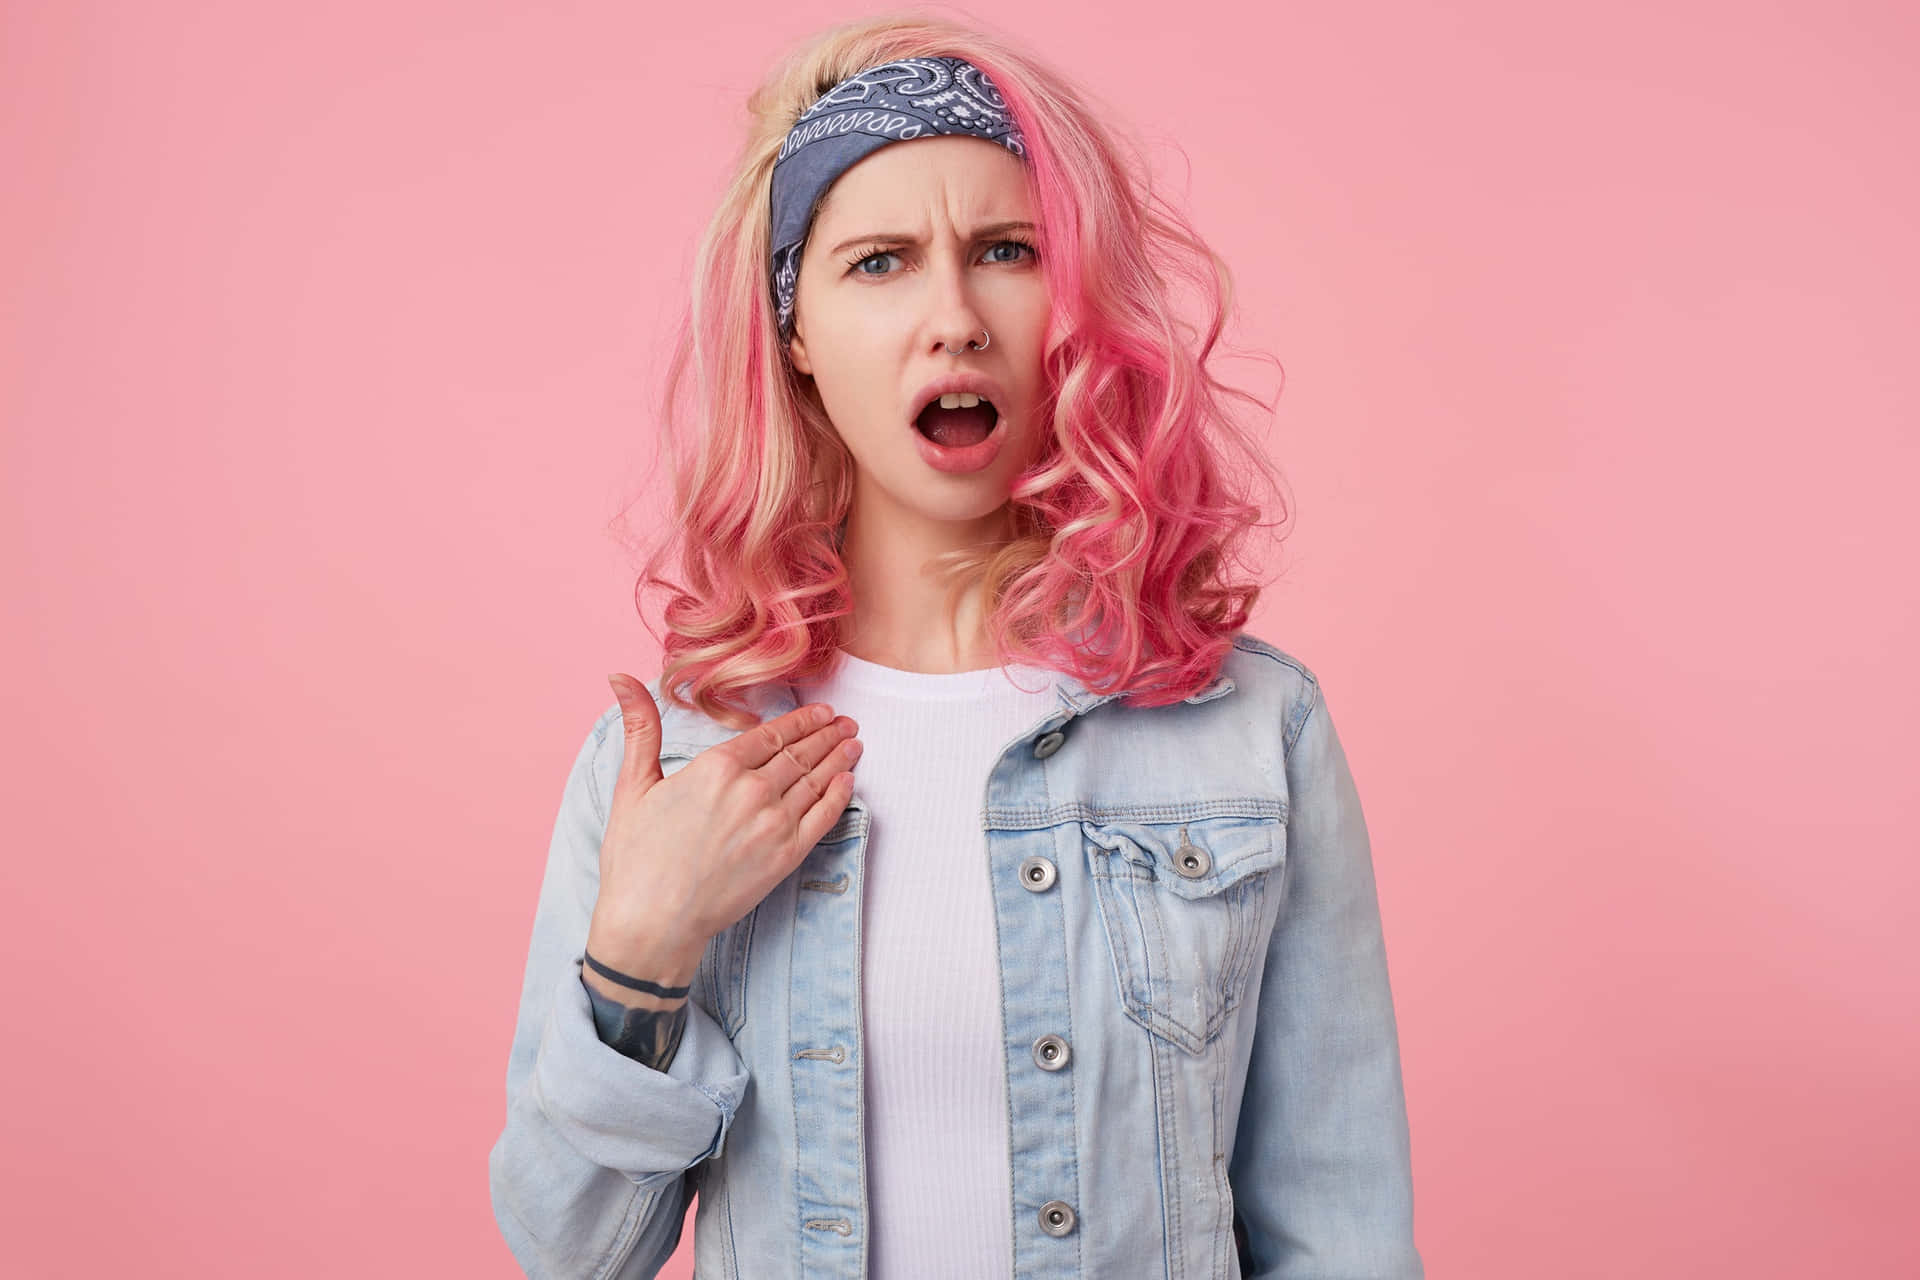 Perturbed Lady With Pink Hair Wallpaper